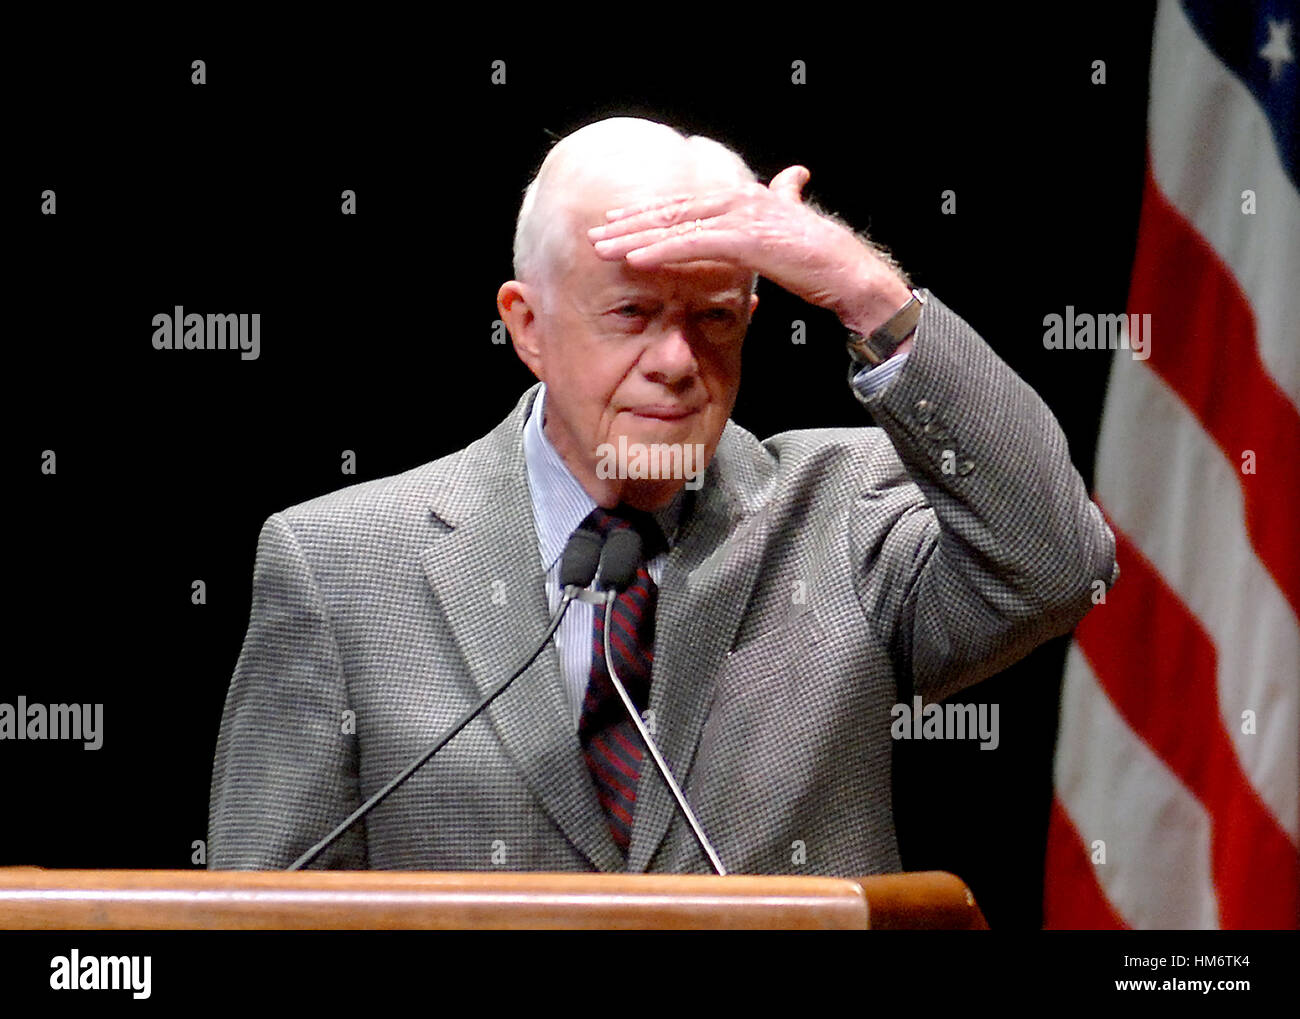 Washington, D.C. - March 8, 2007 -- Former United States President Jimmy Carter shields his eyes from the bright lights while listening to a student's question concerning his controversial book 'Palestine: Peace Not Apartheid' during an appearance at Geor Stock Photo